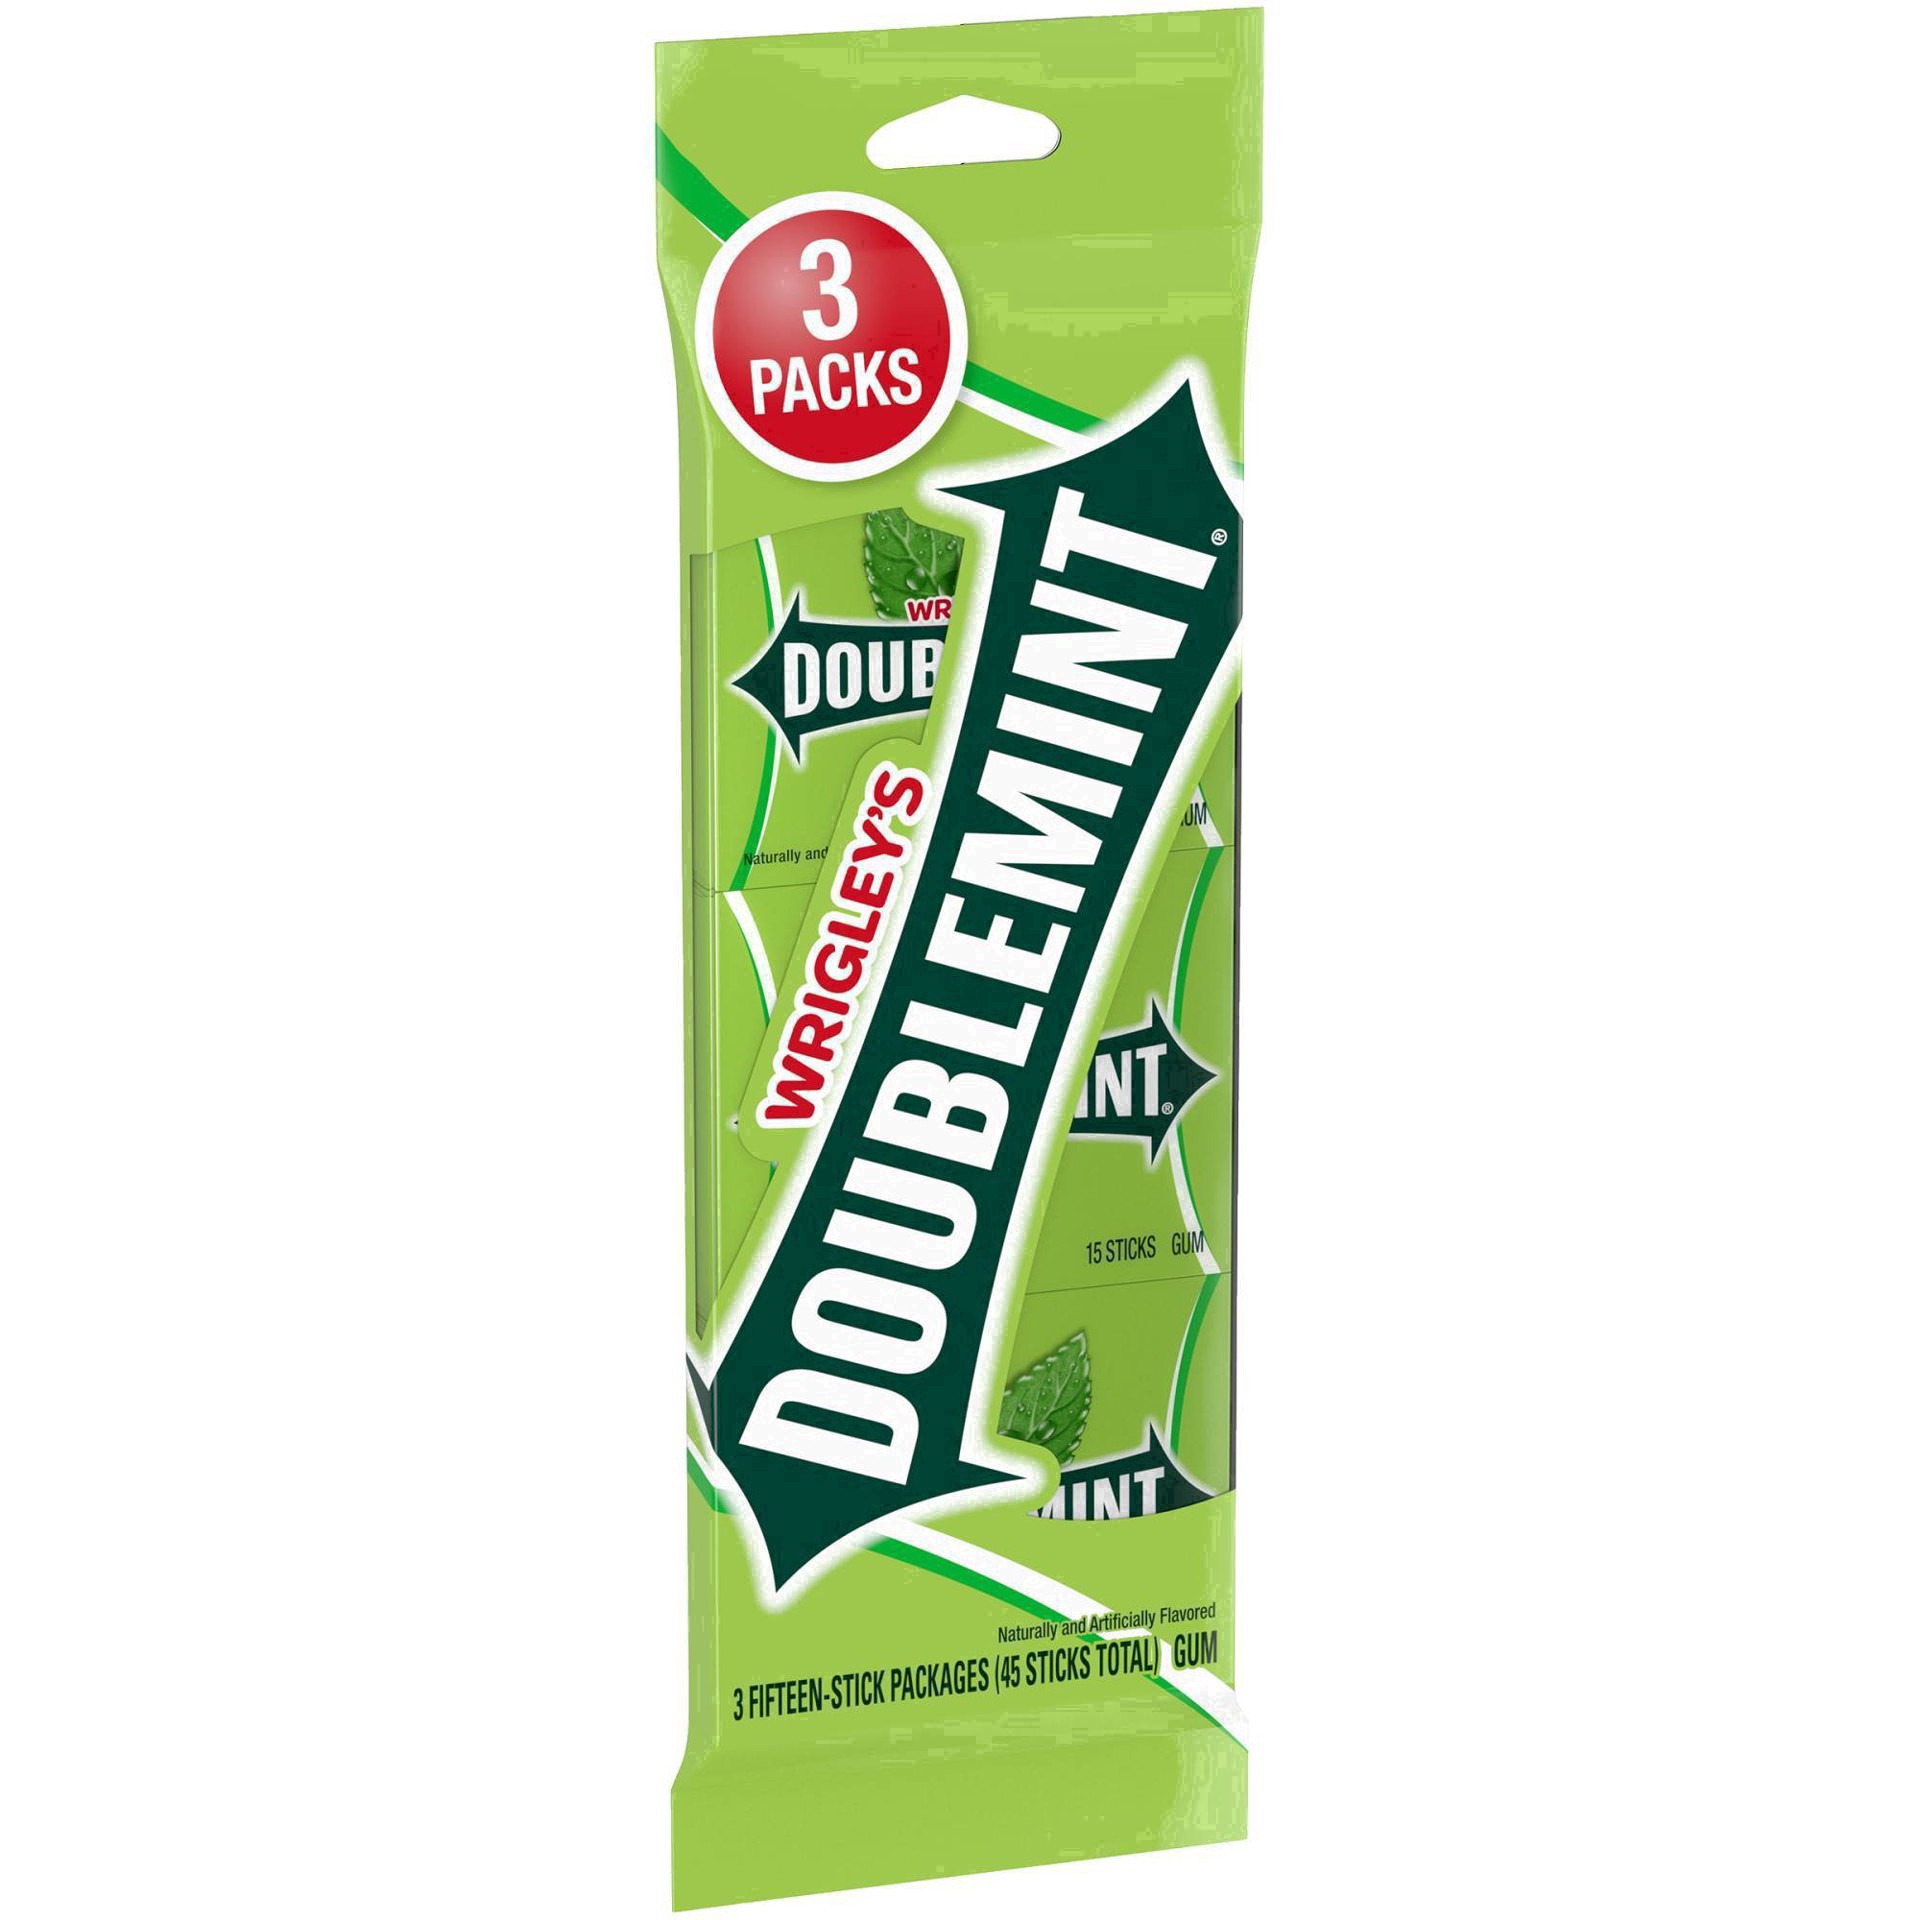 slide 99 of 134, Doublemint WRIGLEY'S DOUBLEMINT Bulk Chewing Gum, Value Pack, 15 ct (3 Pack), 45 ct